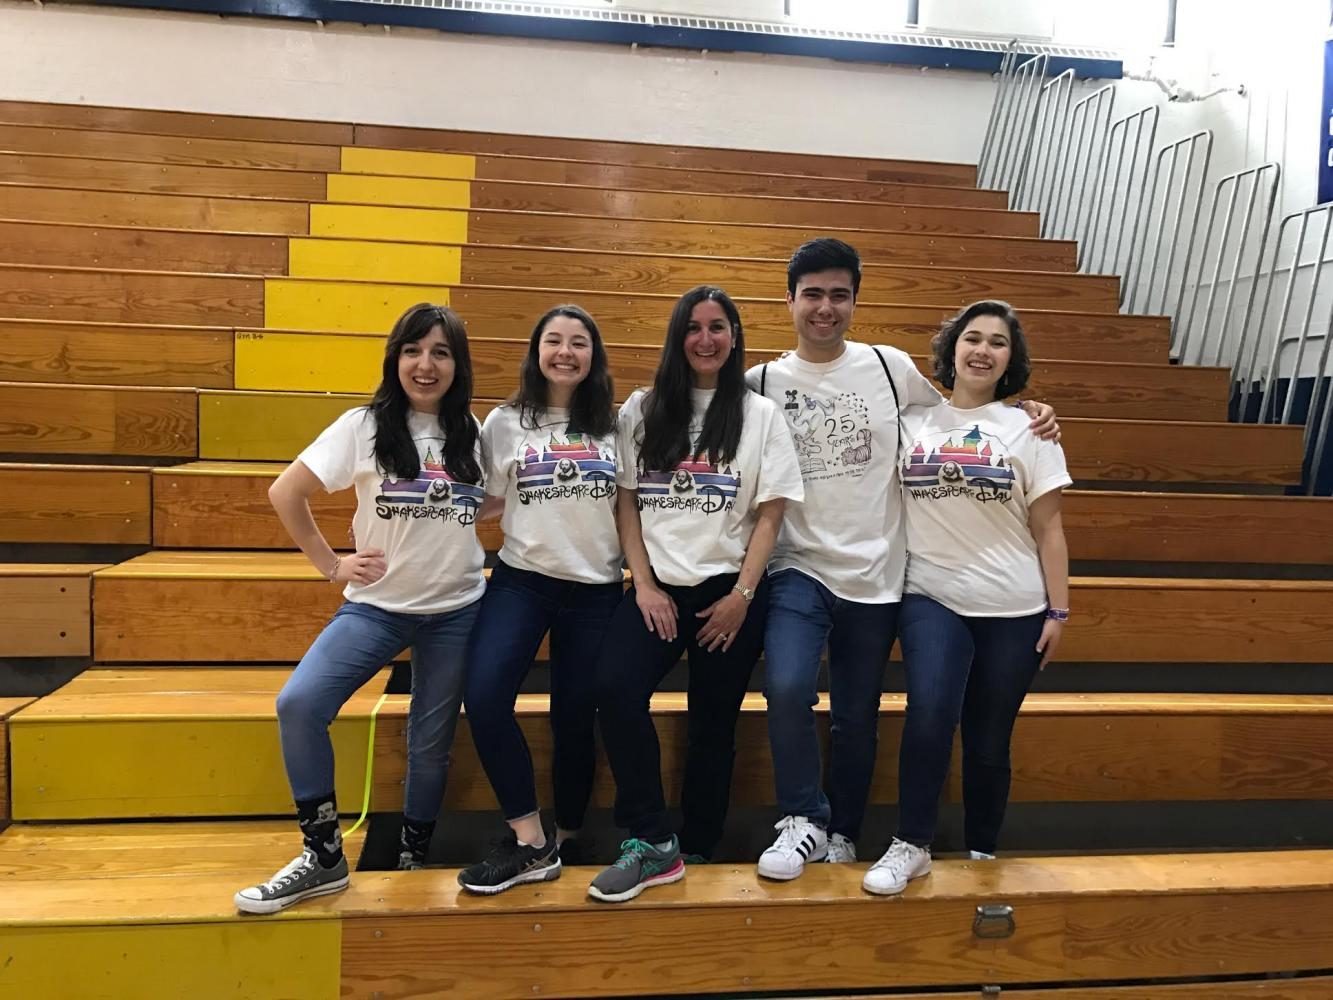 Senior coordinators Sarah DeMarino, Emilia Charno, Christian Hill, and Anna Cohen have helped to coordinate the past two Shakespeare Days with Ms. Valenti.